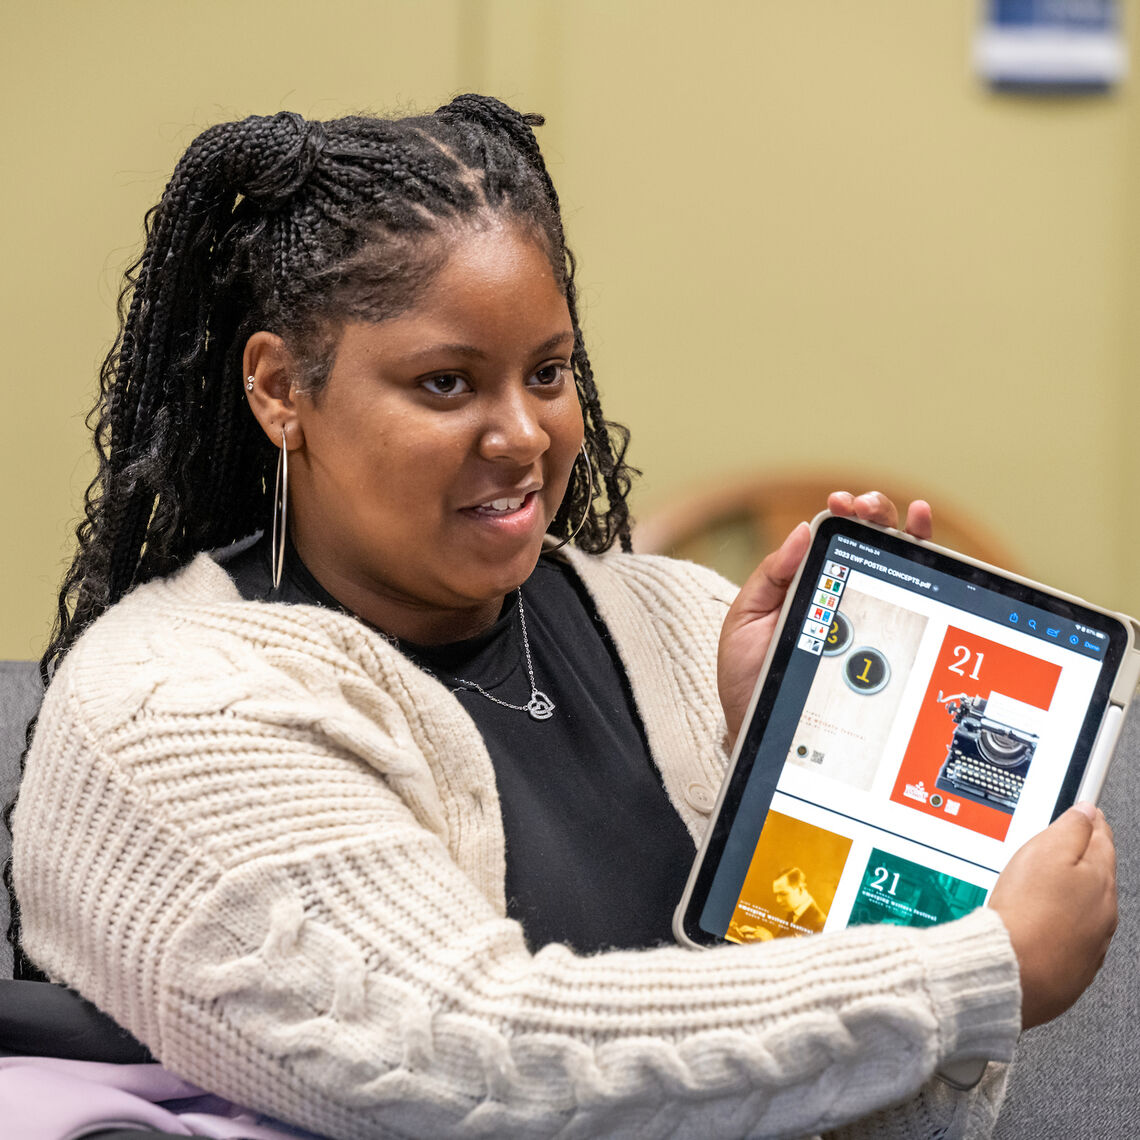 "I’m truly excited to meet the authors and learn from them," says Zyaira James '23, member of the Emerging Writers Festival planning committee.